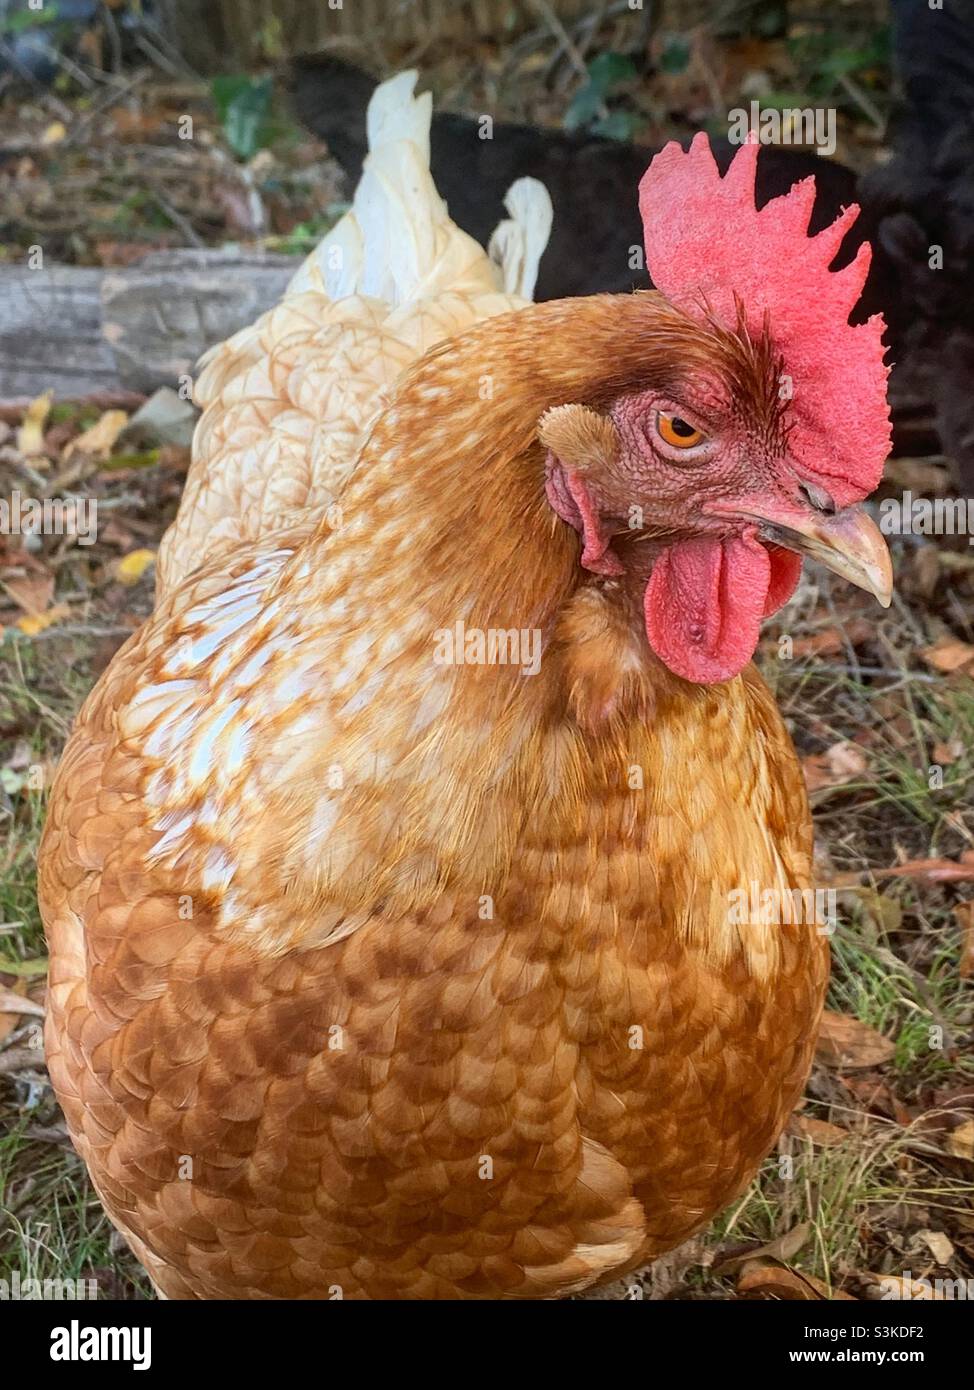 This Rhode Island Red chicken (gallus gallus domesticus) named Henny Penny  frowns at the camera Stock Photo - Alamy